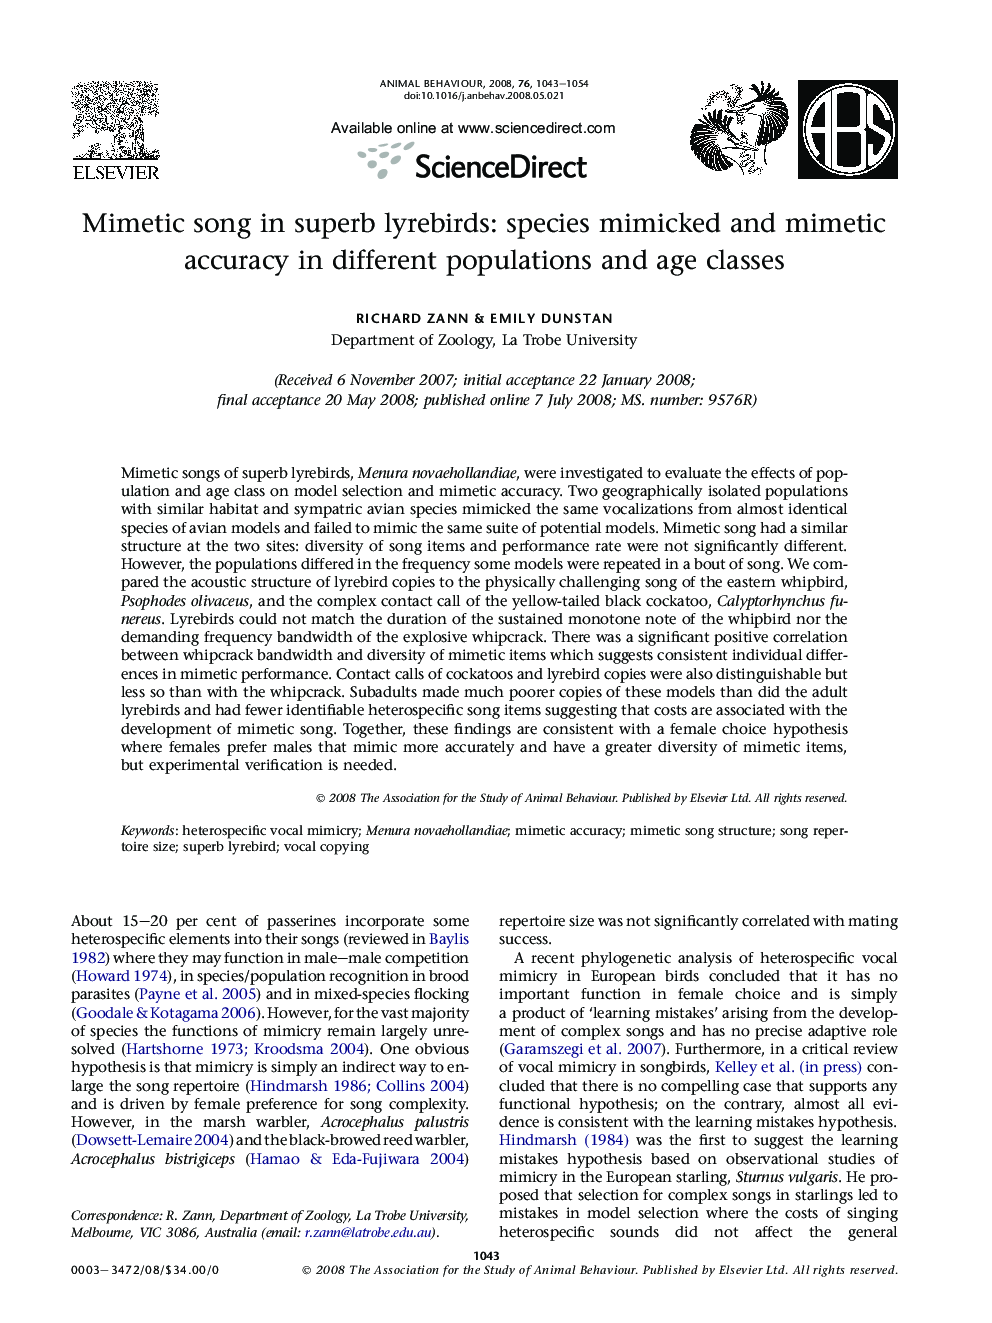 Mimetic song in superb lyrebirds: species mimicked and mimetic accuracy in different populations and age classes